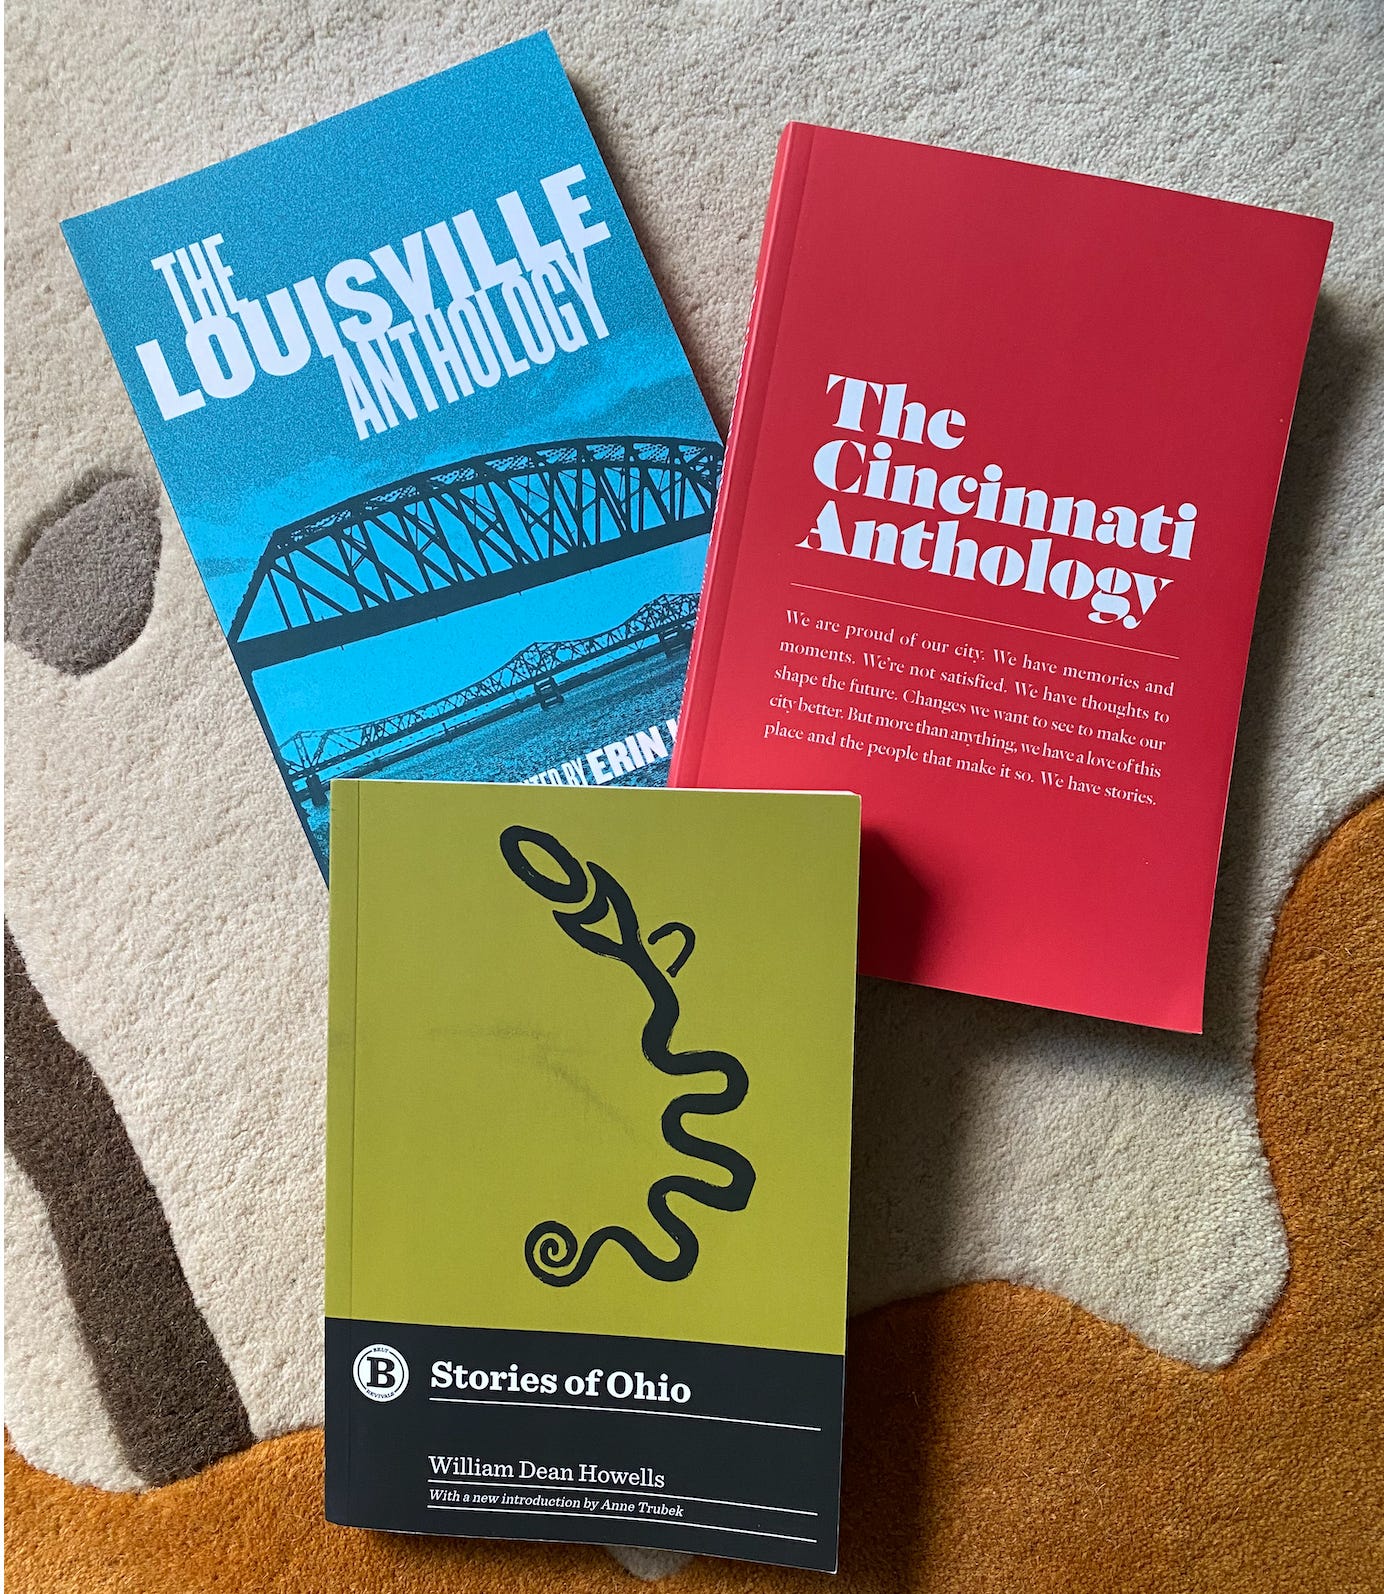 Anthologies for Louisville and Cincinnati and the reissued “Stories of Ohio” by Belt Publishing